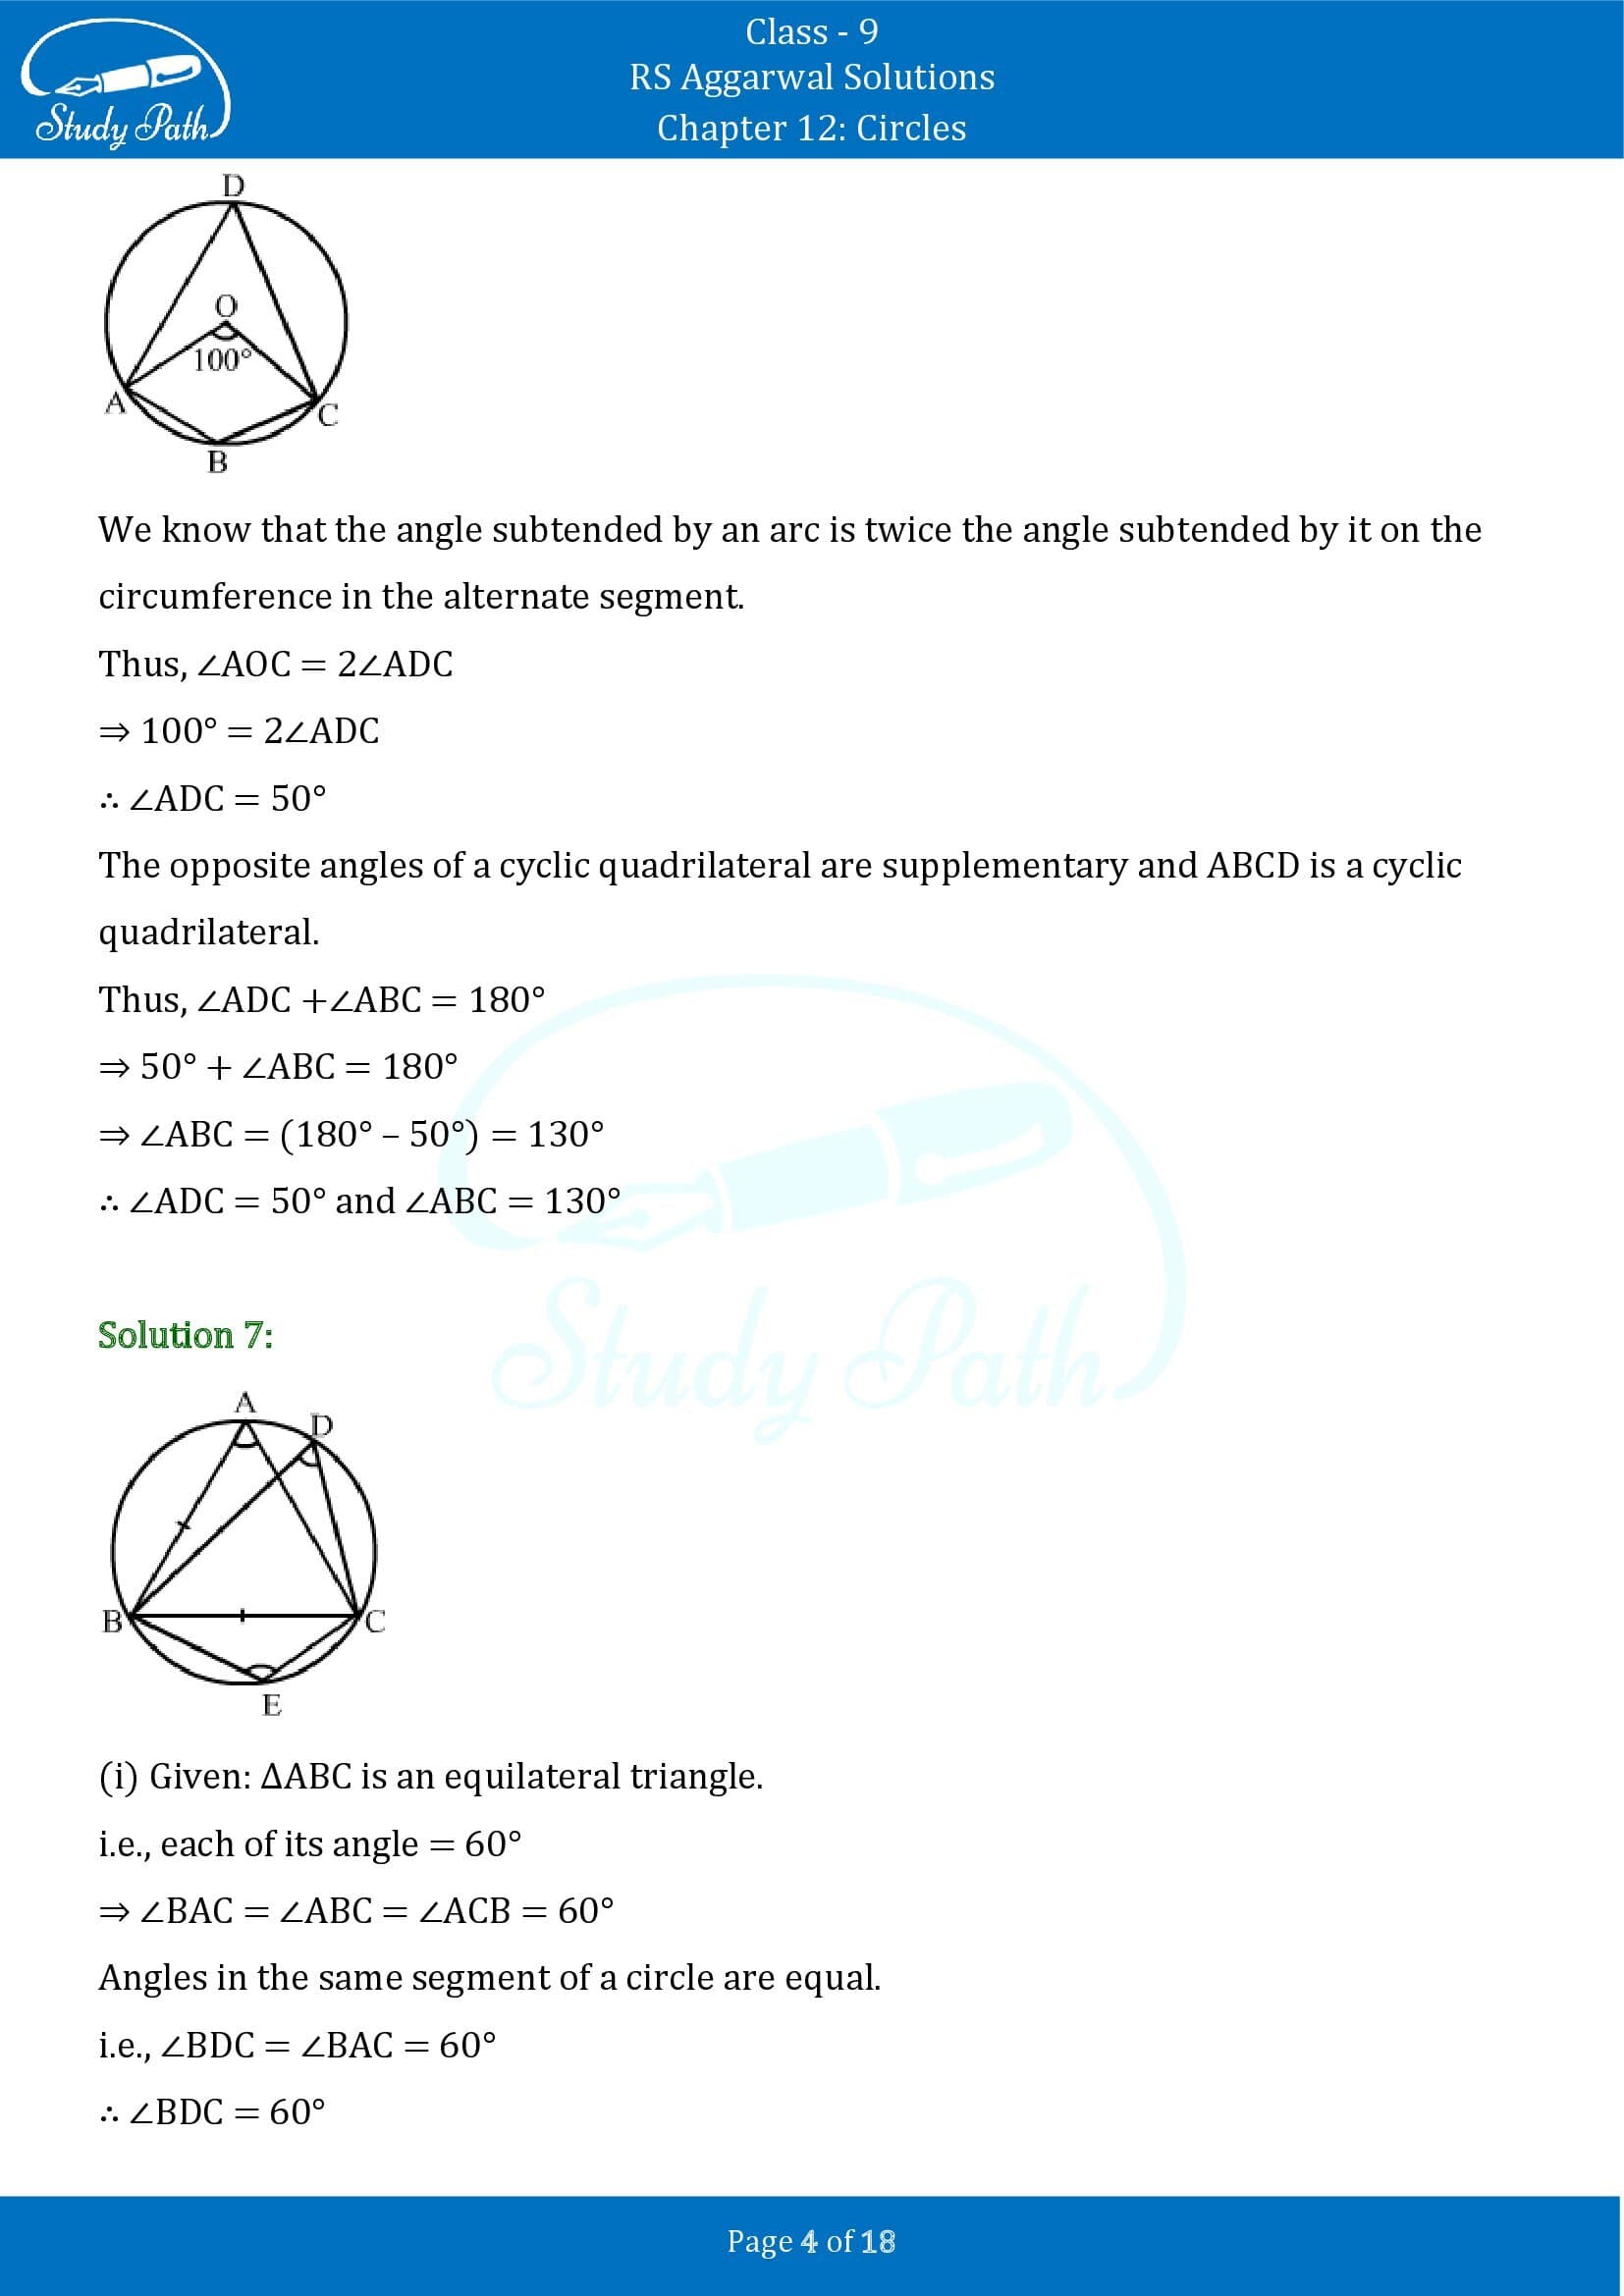 RS Aggarwal Solutions Class 9 Chapter 12 Circles Exercise 12C 00004